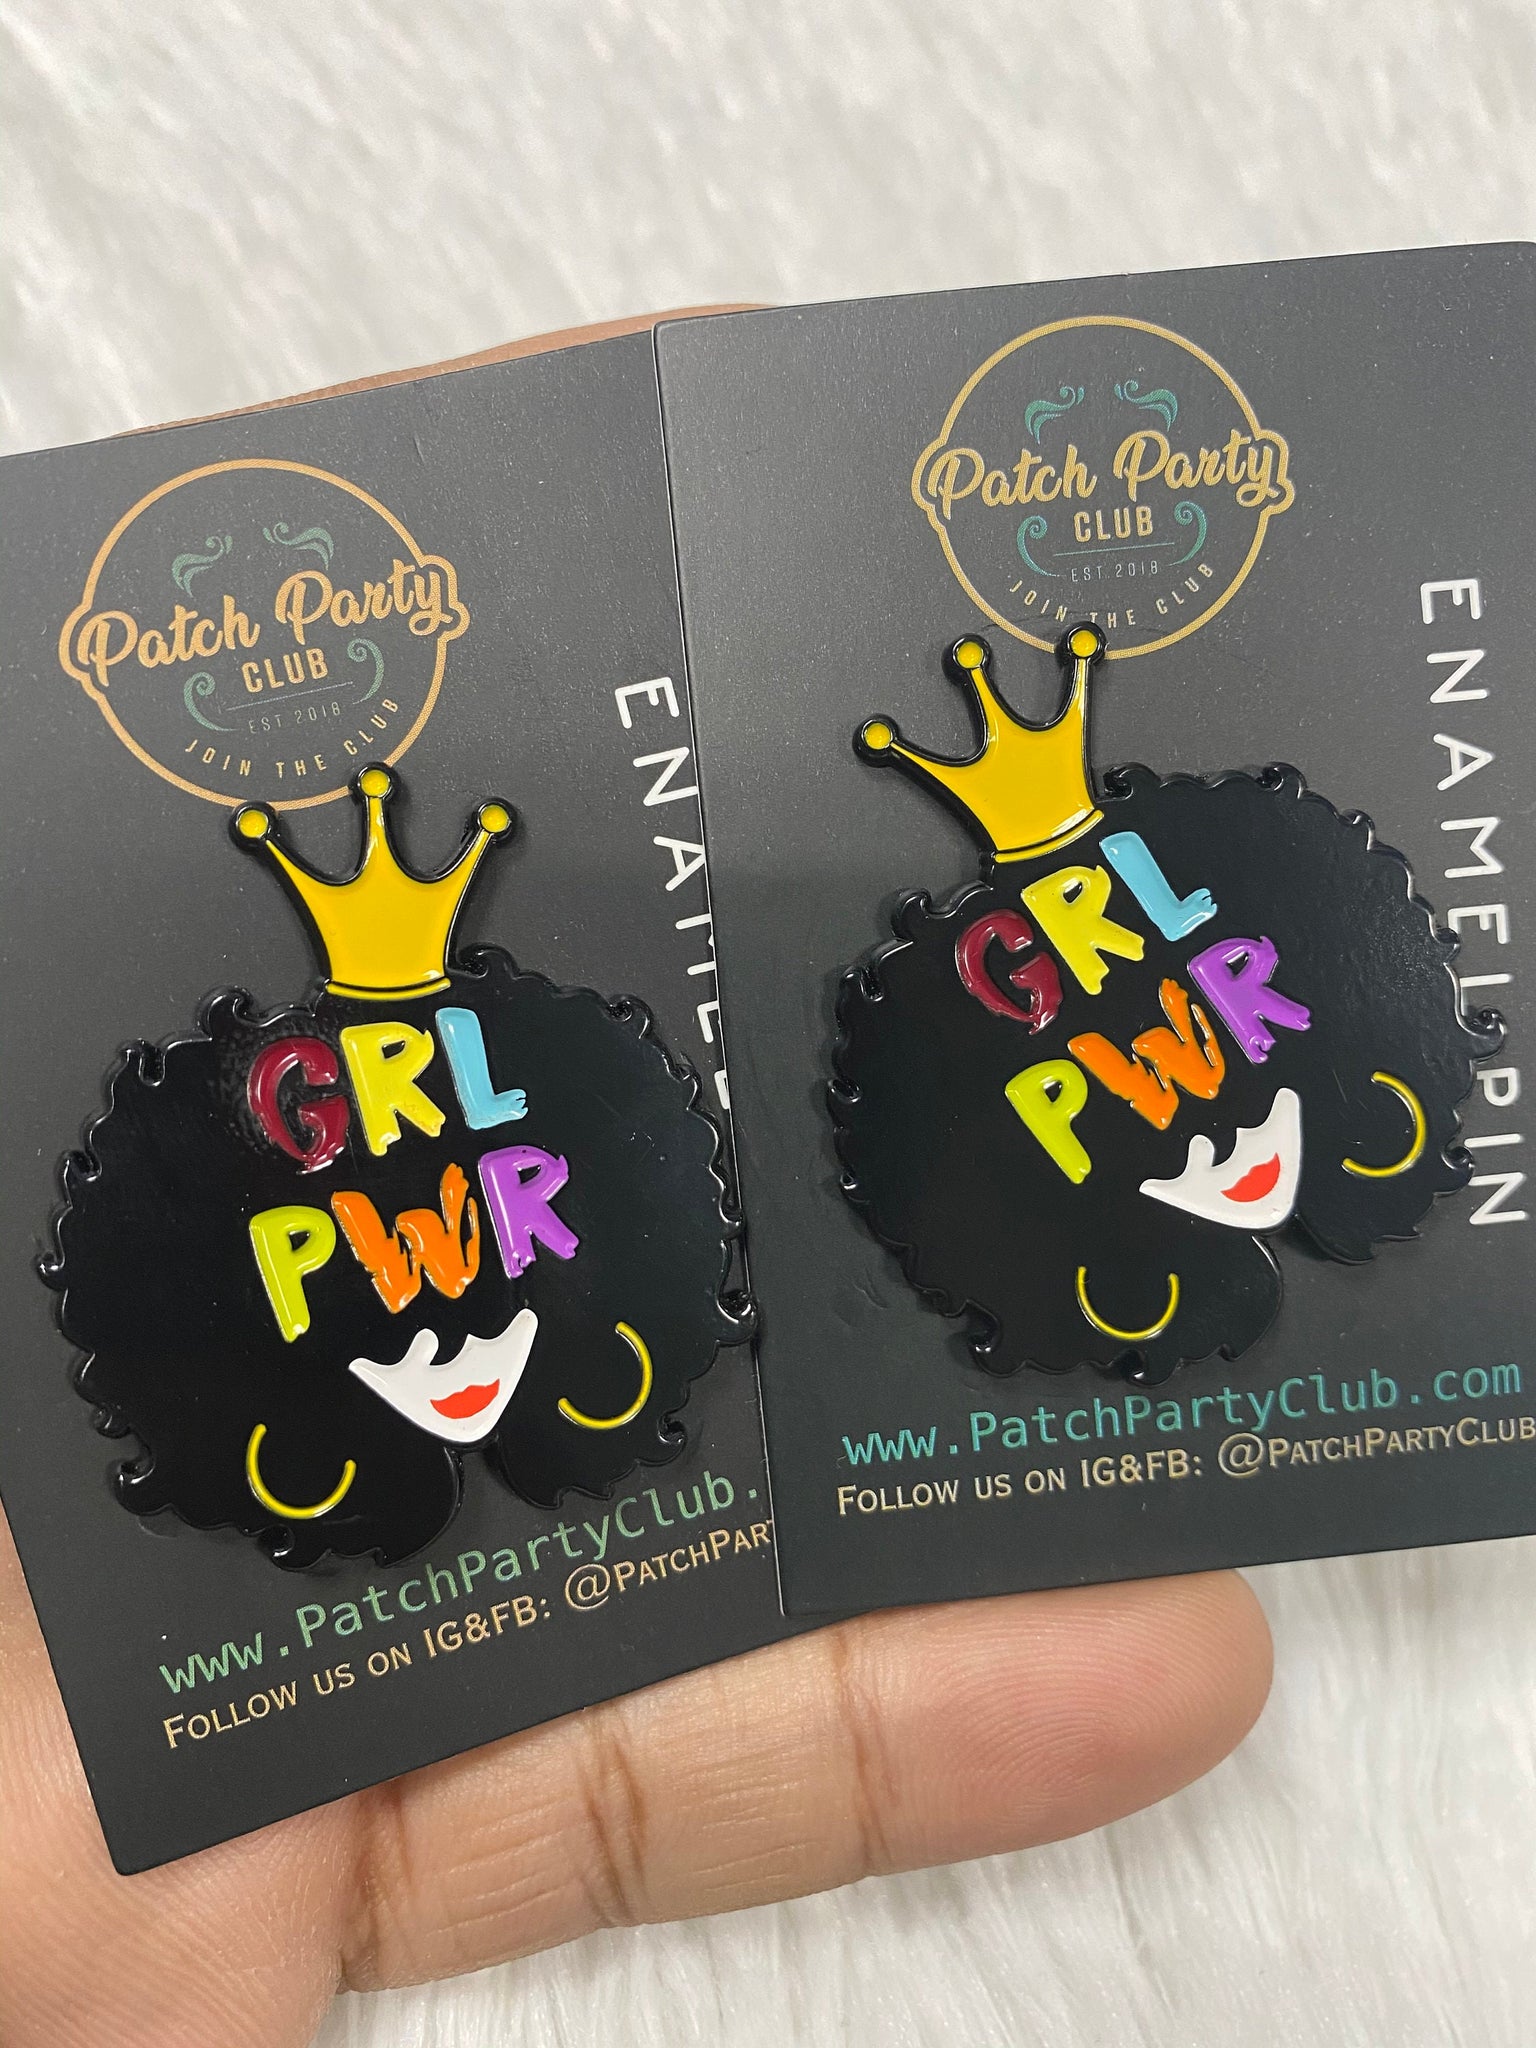 NEW, Pin Feminist, Enamel Pin "GRL POWER " Exclusive Lapel Pin, Grl Power Pin, Size 1.50 inches, with Butterfly Clutches